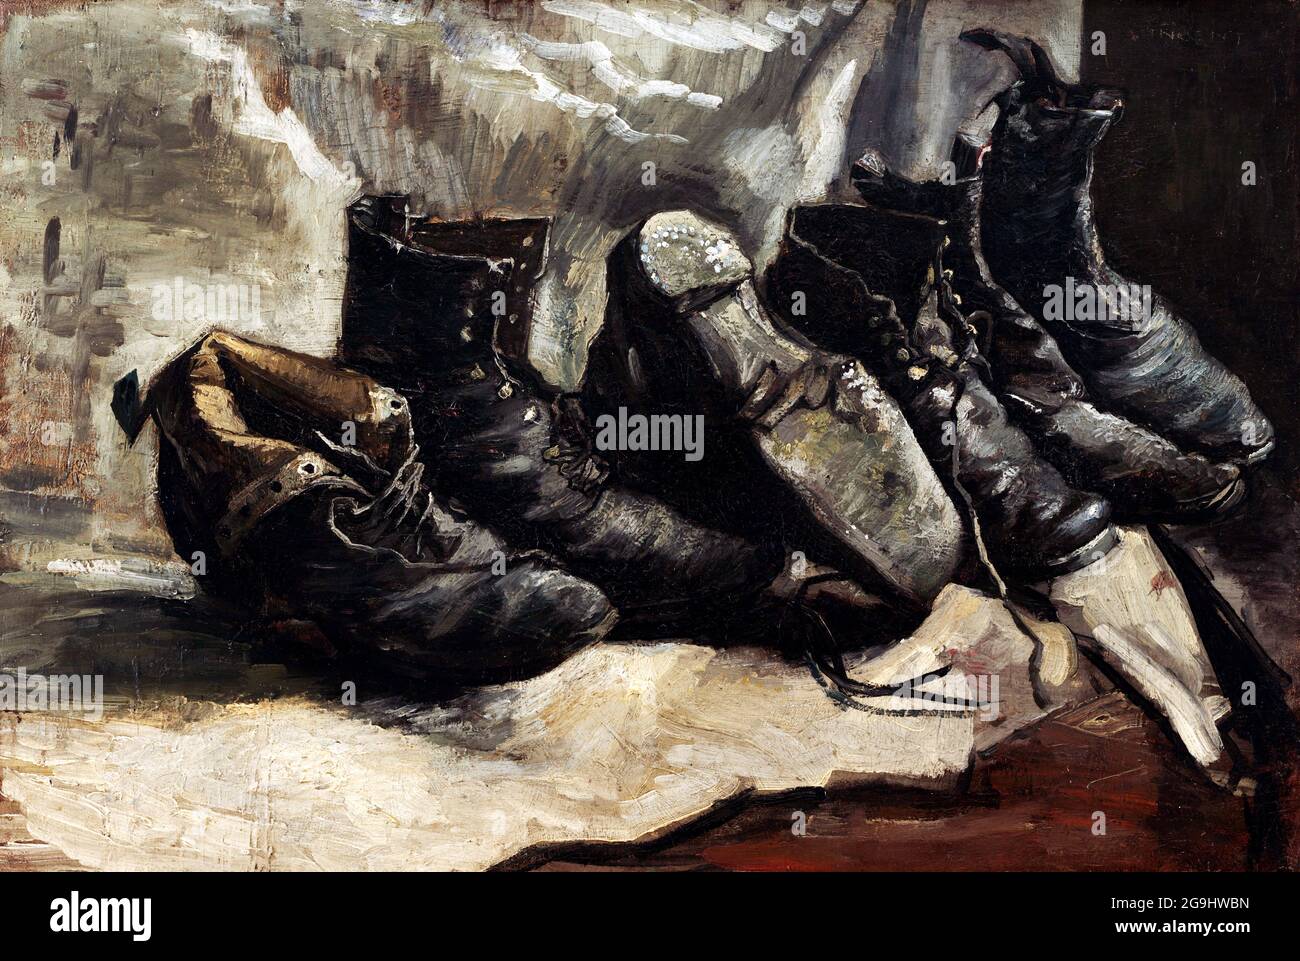 Three Pairs of Shoes by Vincent van Gogh (1853-1890), oil on canvas, 1886/7 Stock Photo